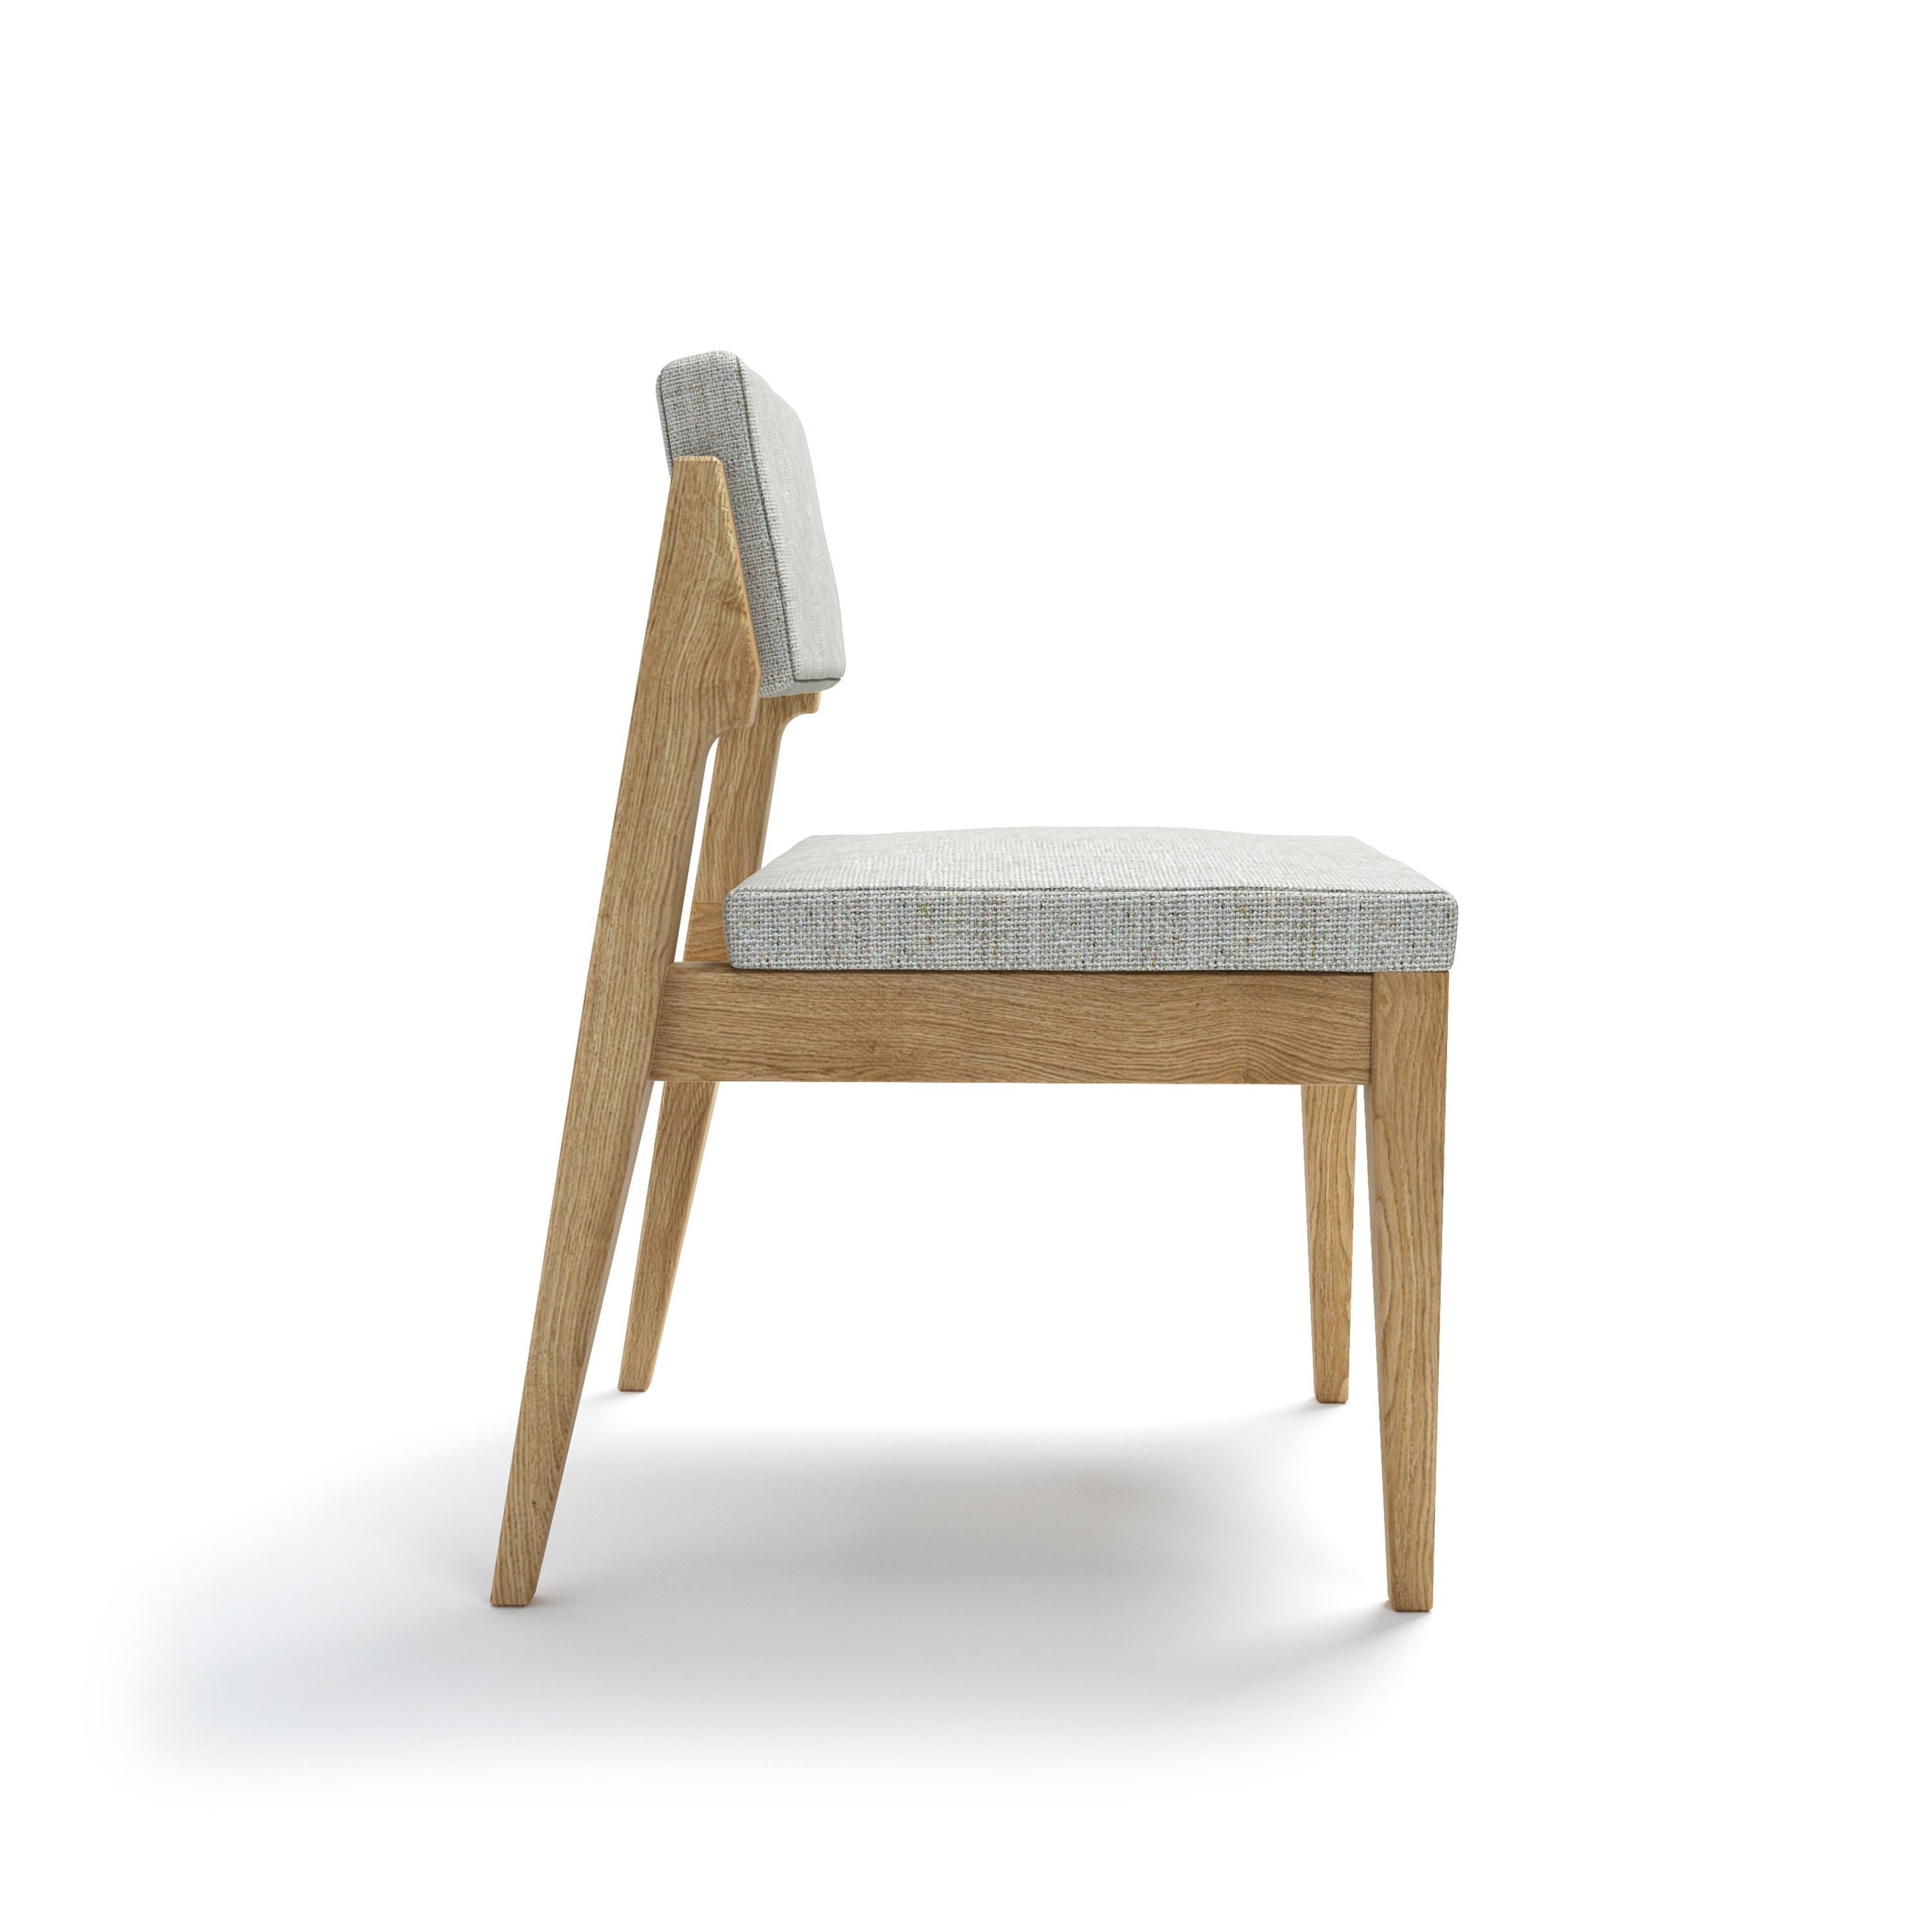 The Talvi Dining Chair is the perfect fusion of comfort, style, and practicality. Constructed from high quality solid oak wood. Expertly crafted to provide both a unique look and lasting durability, the Talvi Dining Chair is the perfect addition to